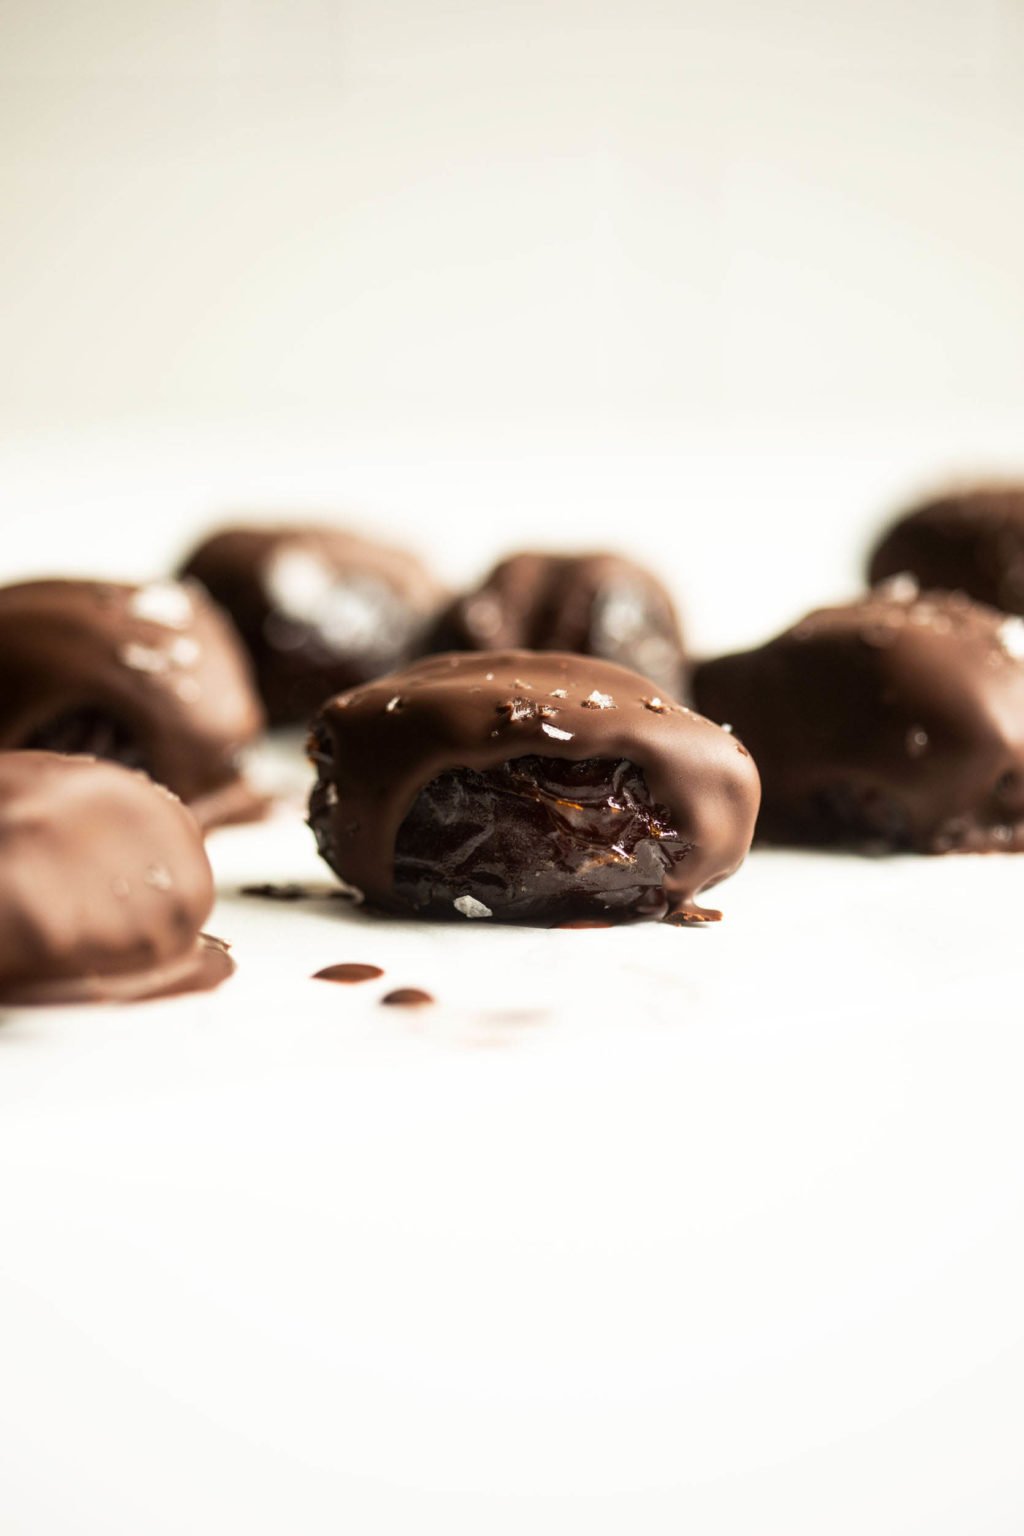 Medjool dates that have been drizzled with dark chocolate and sea salt are arranged on a white surface.